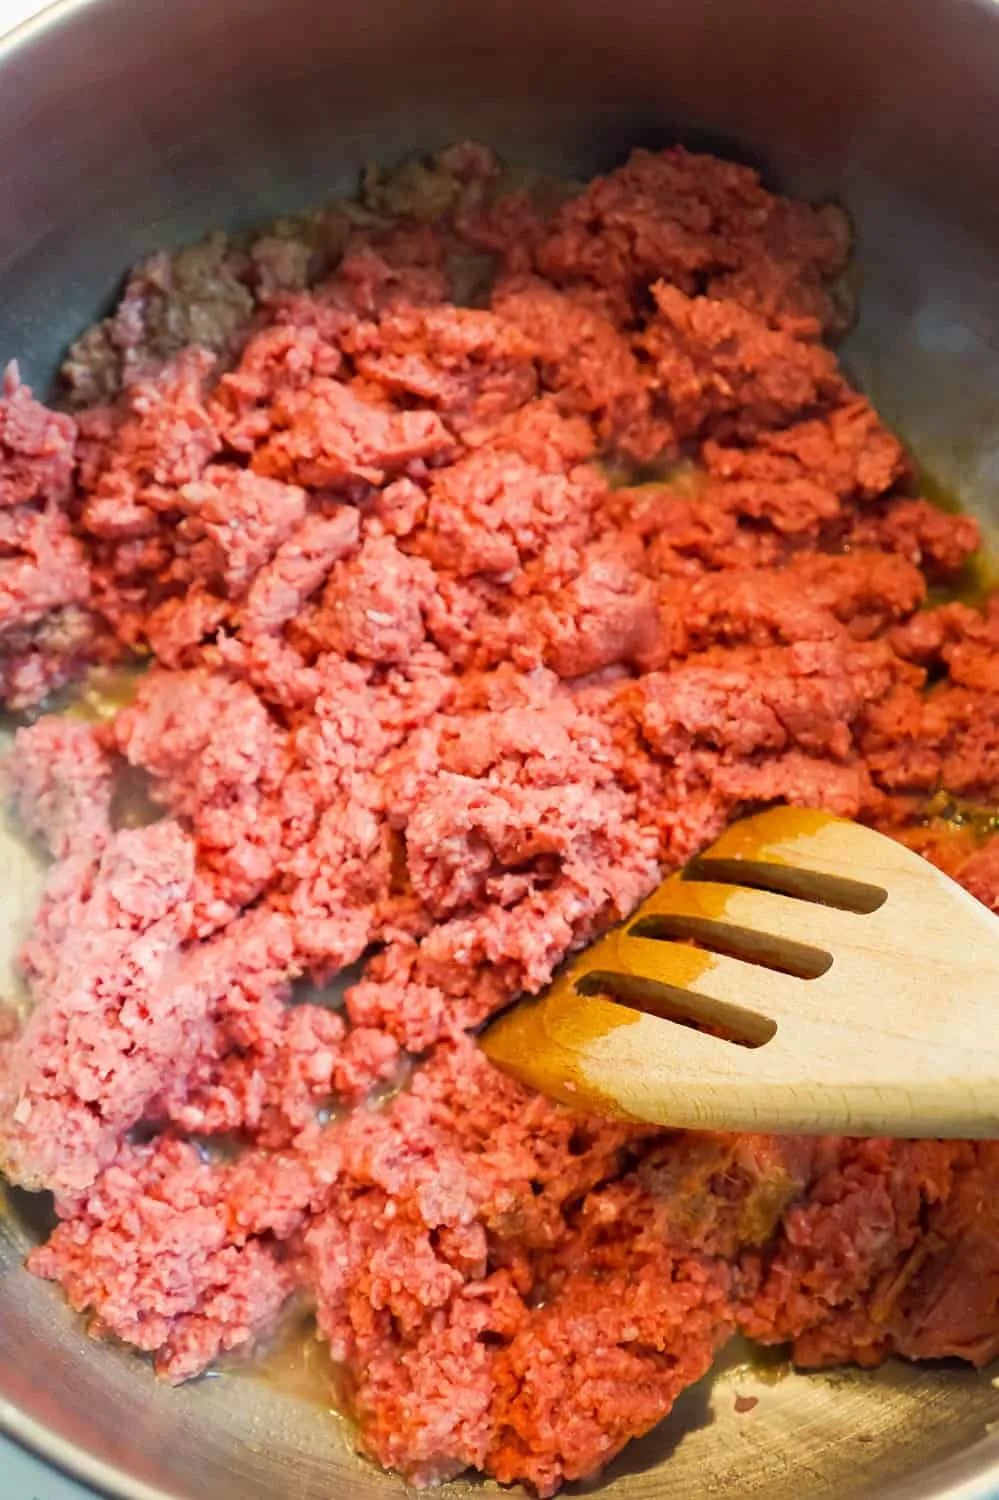 raw ground beef in a pan